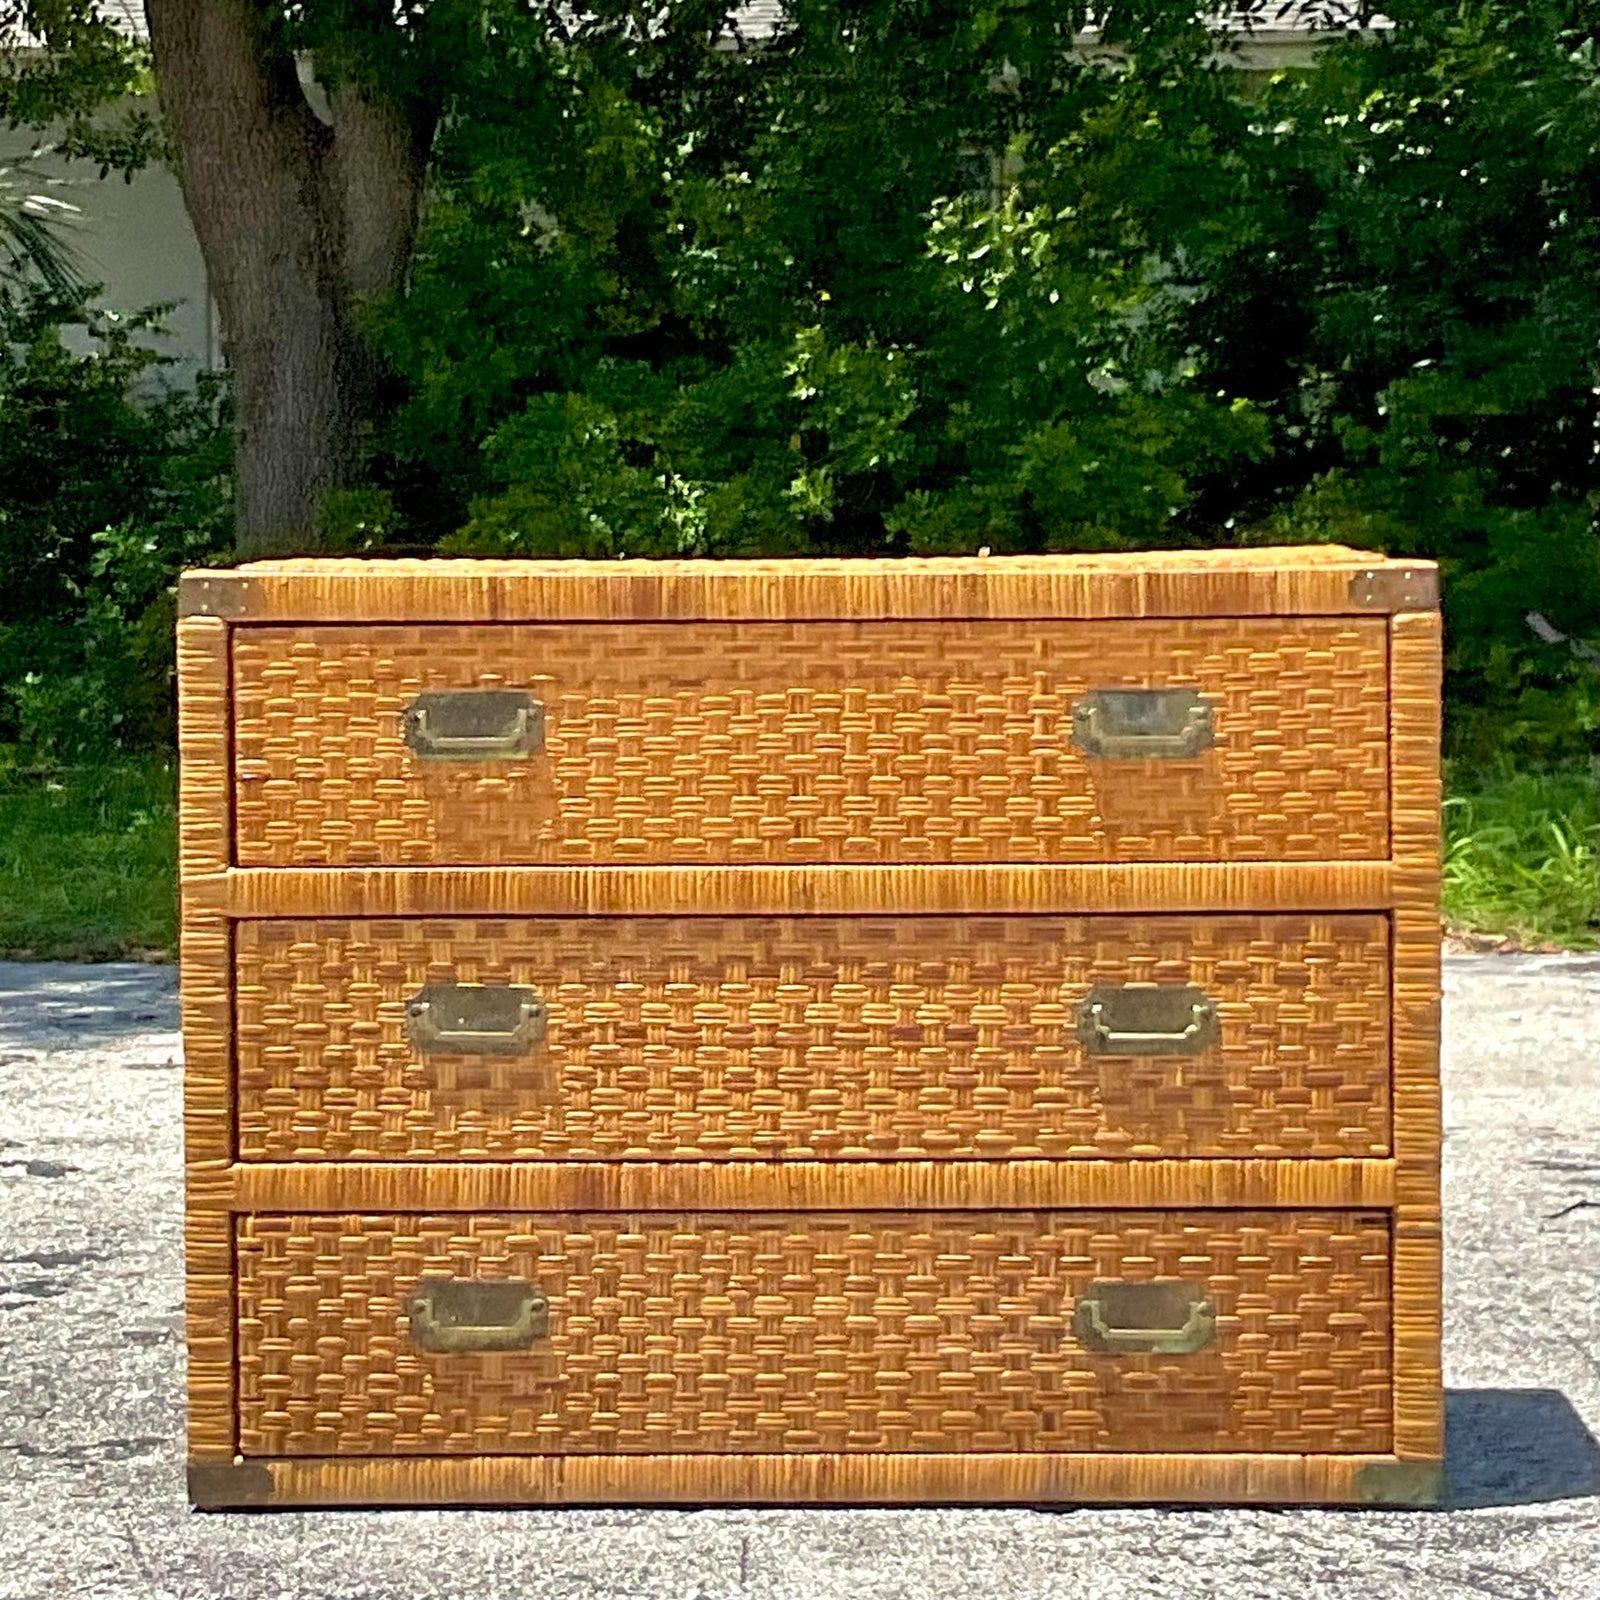 A fabulous vintage Coastal chest of drawers. A chic woven rattan with classic Campaign hardware. Matching nightstands also available.